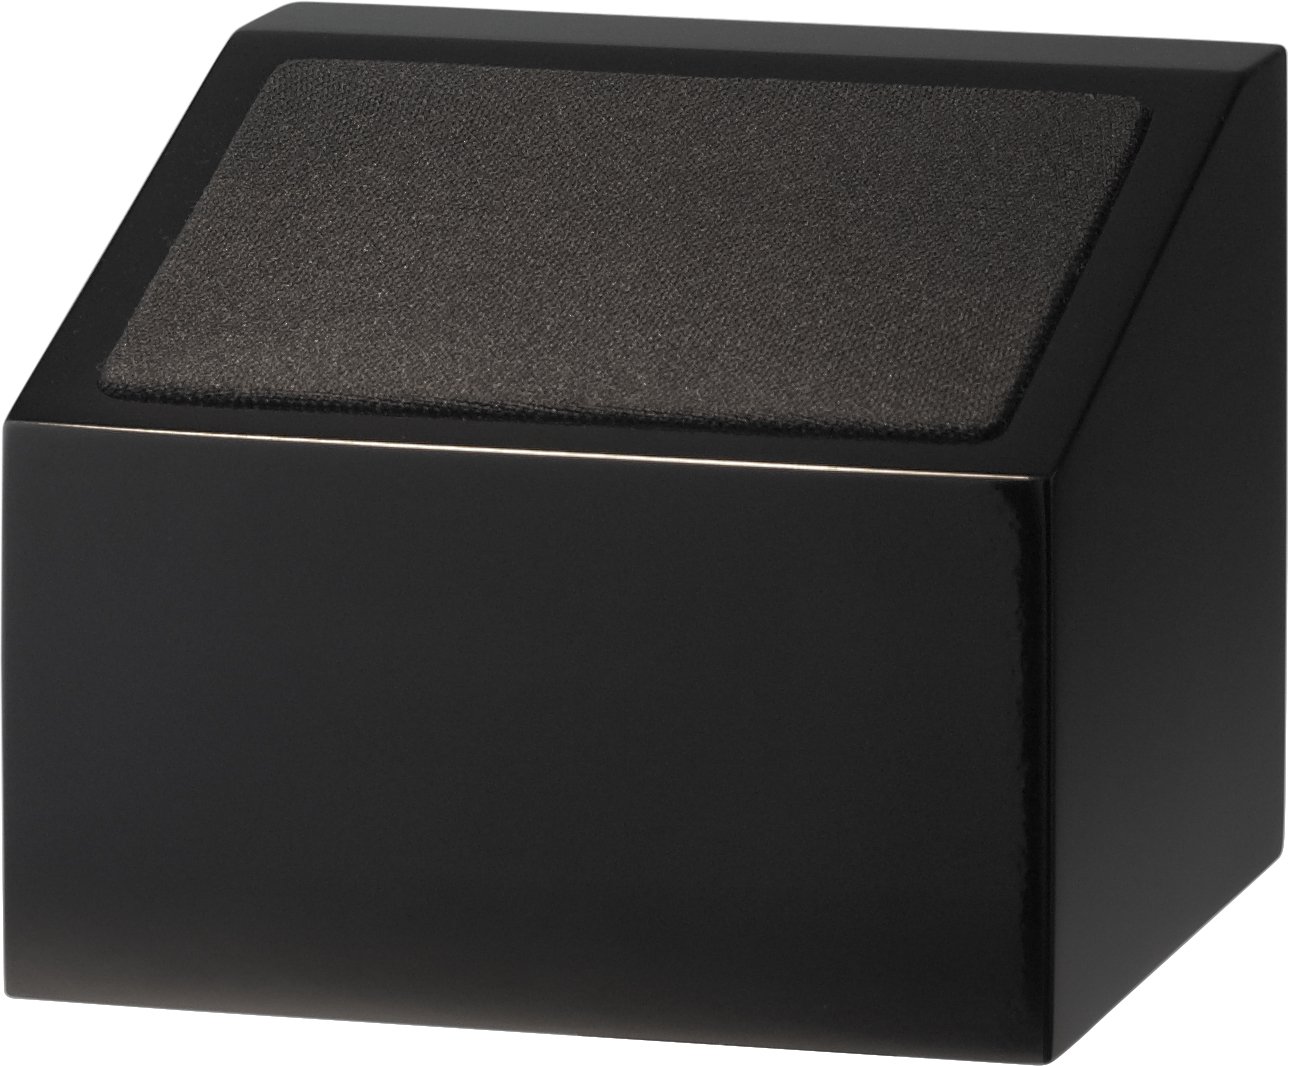 NHT Atmos Mini Add-On Speaker for Dolby Atmos Single - High Gloss Black by NHT Audio